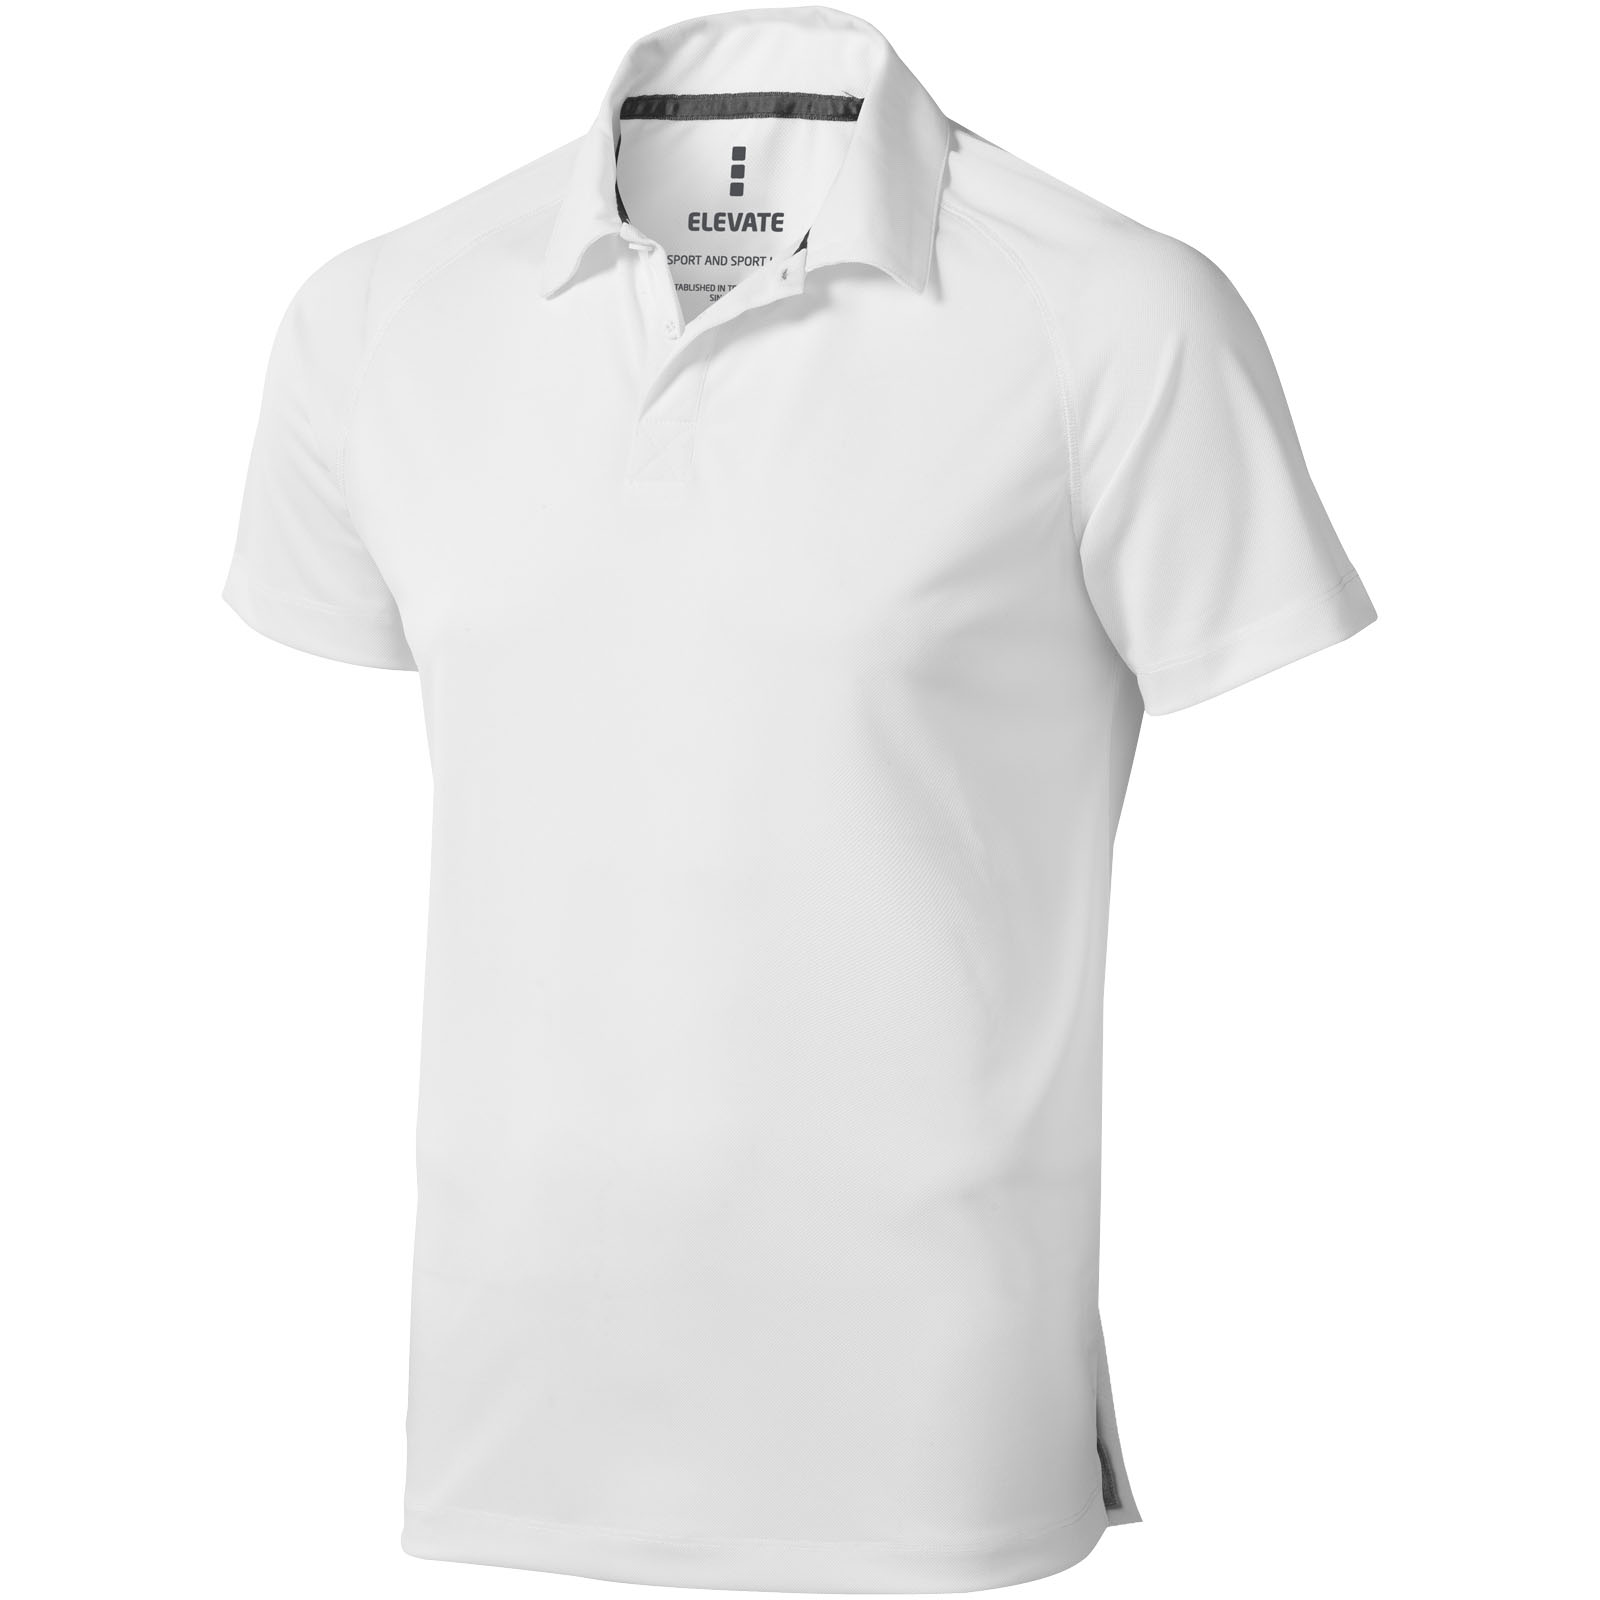 Advertising Polos - Ottawa short sleeve men's cool fit polo - 0